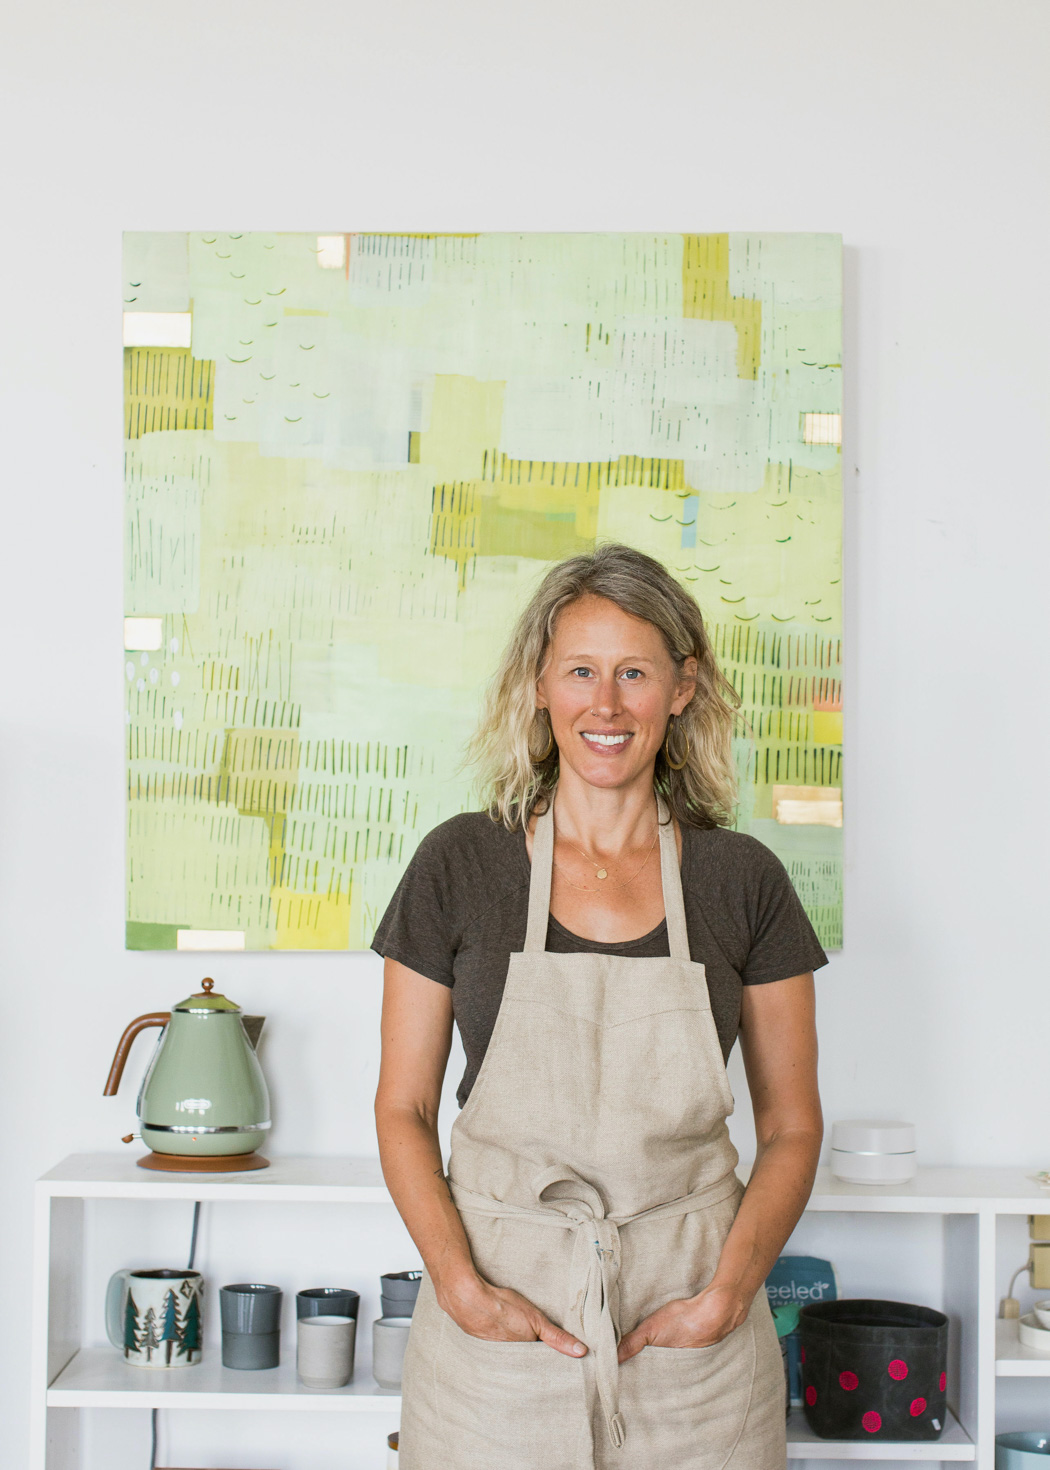 View of a blonde woman smiling at the camera and an abstract painting at the background